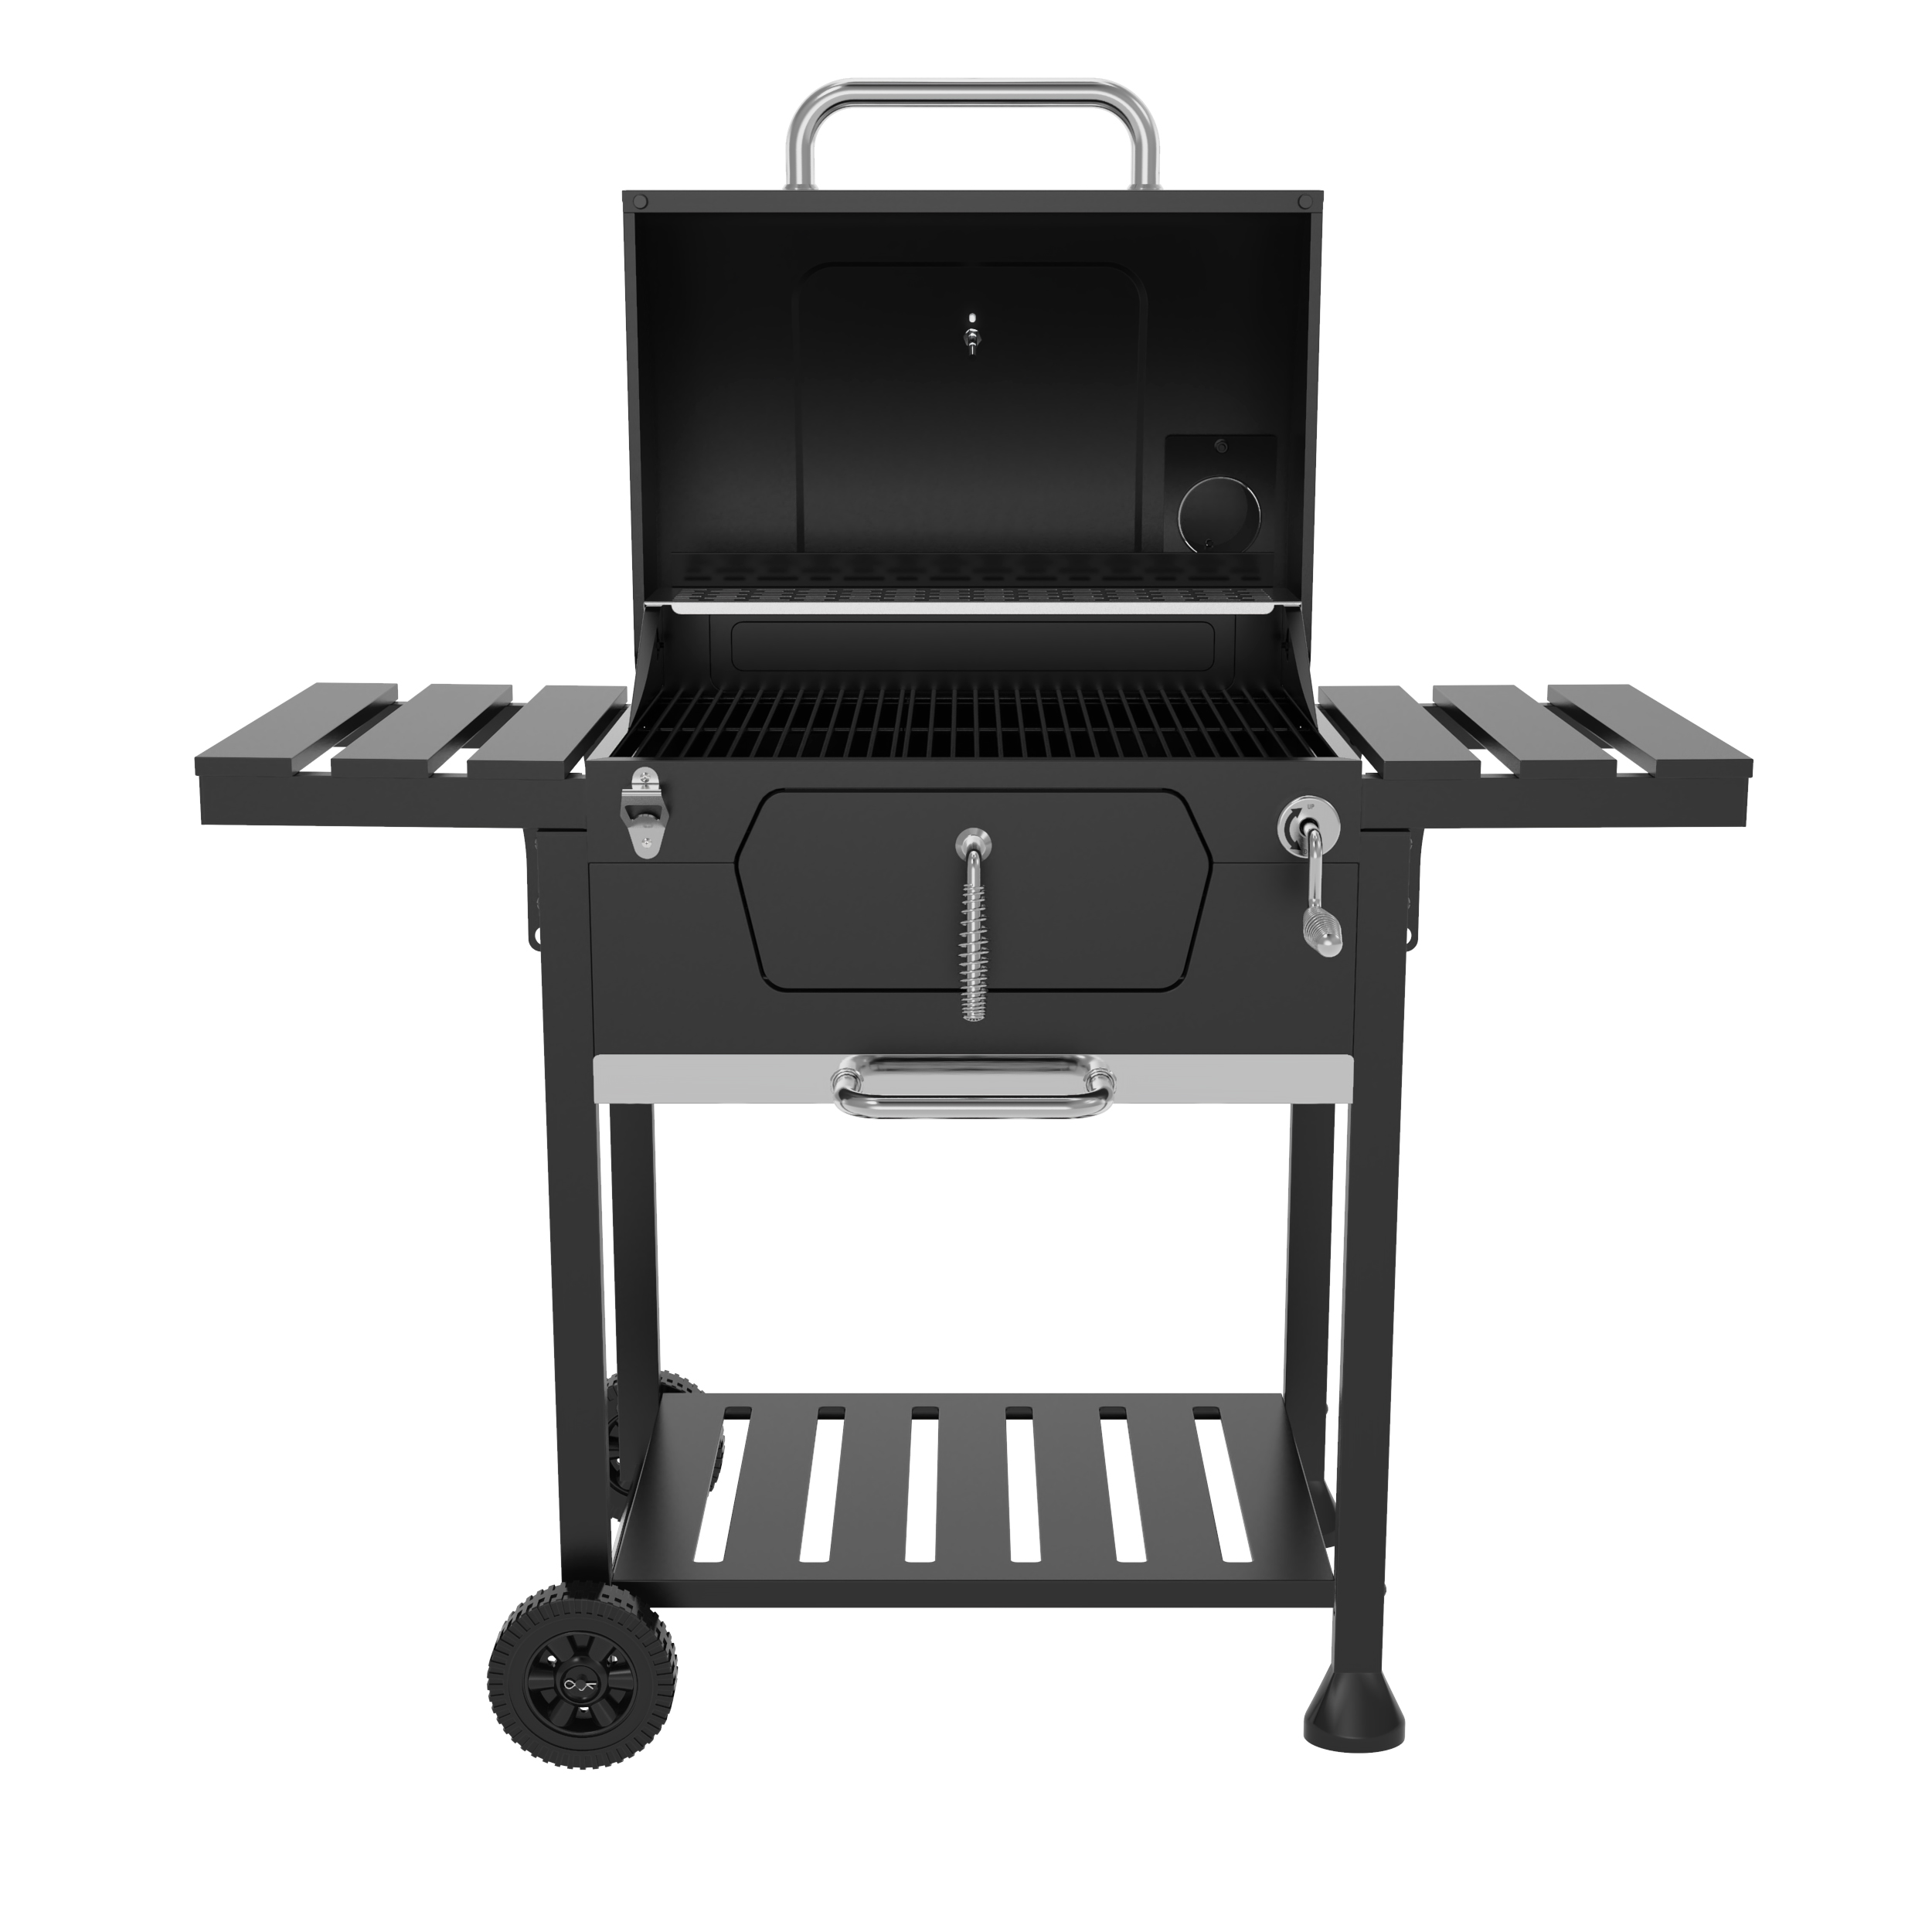 23-inch Charcoal BBQ Grill 492 Square Inches,For Outdoor Royal Gourmet CD1824E 